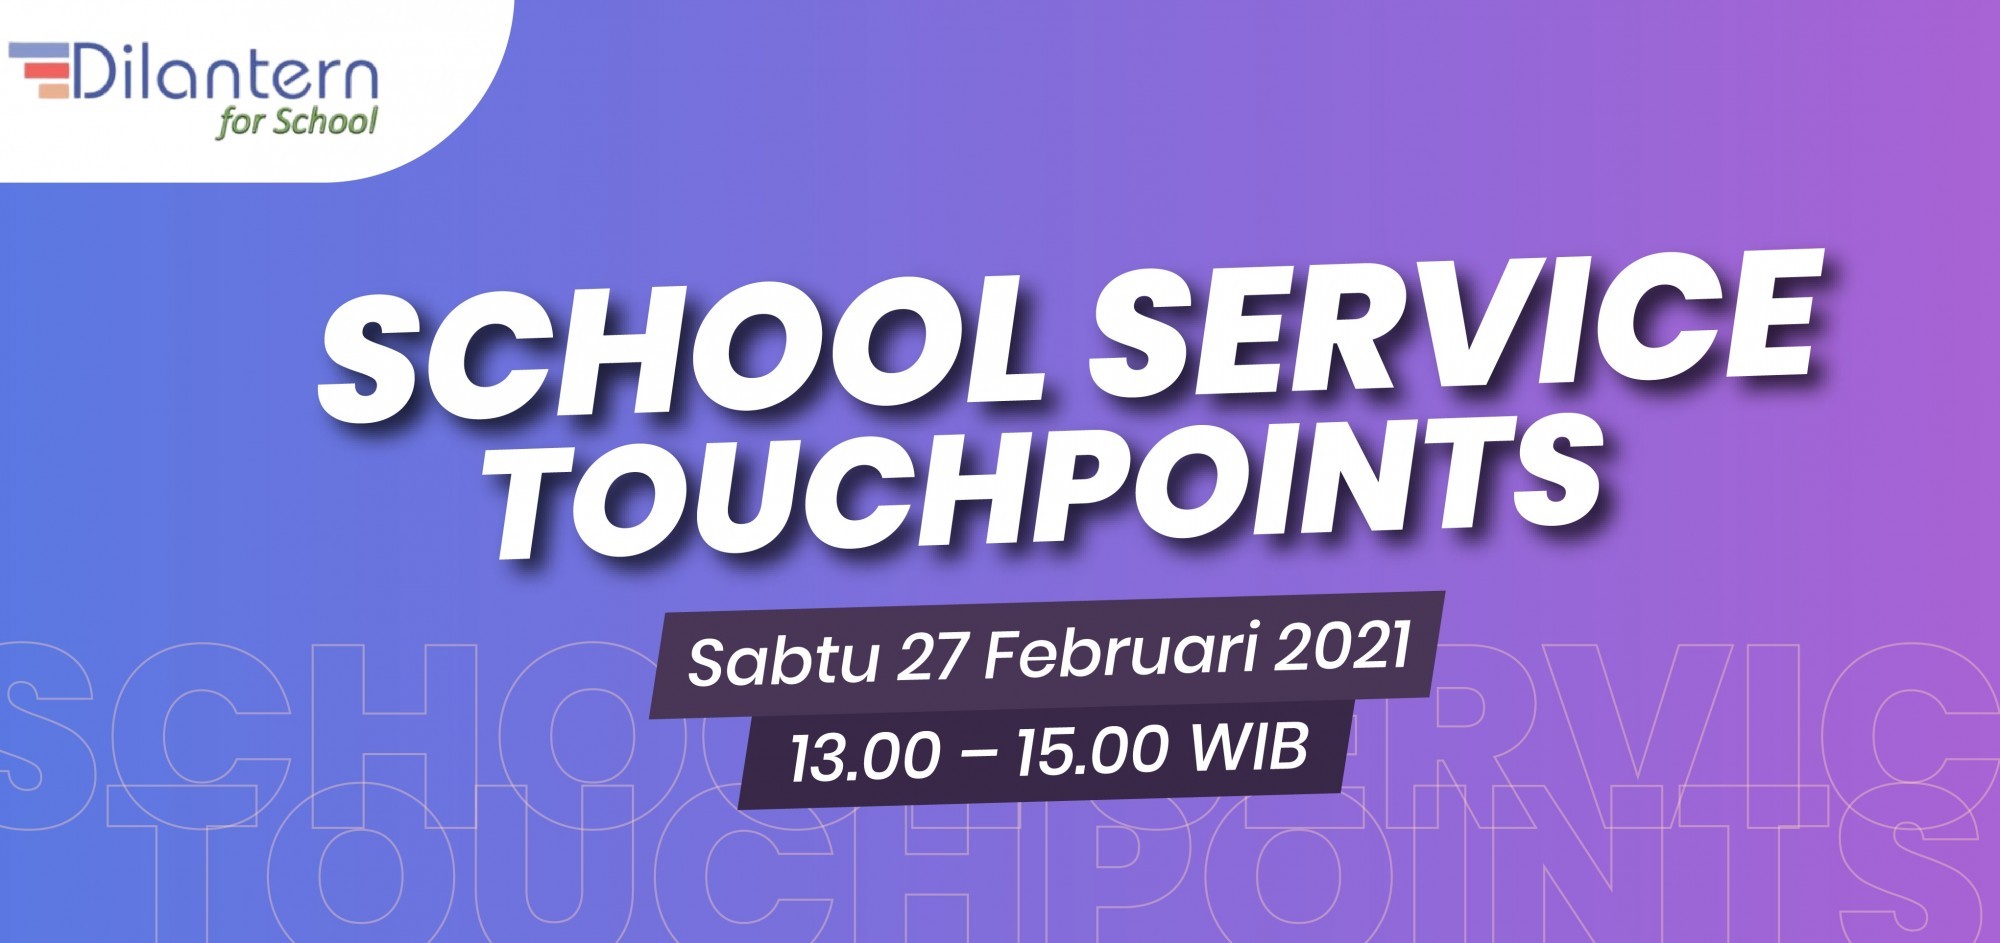 SCHOOL SERVICE TOUCHPOINTS